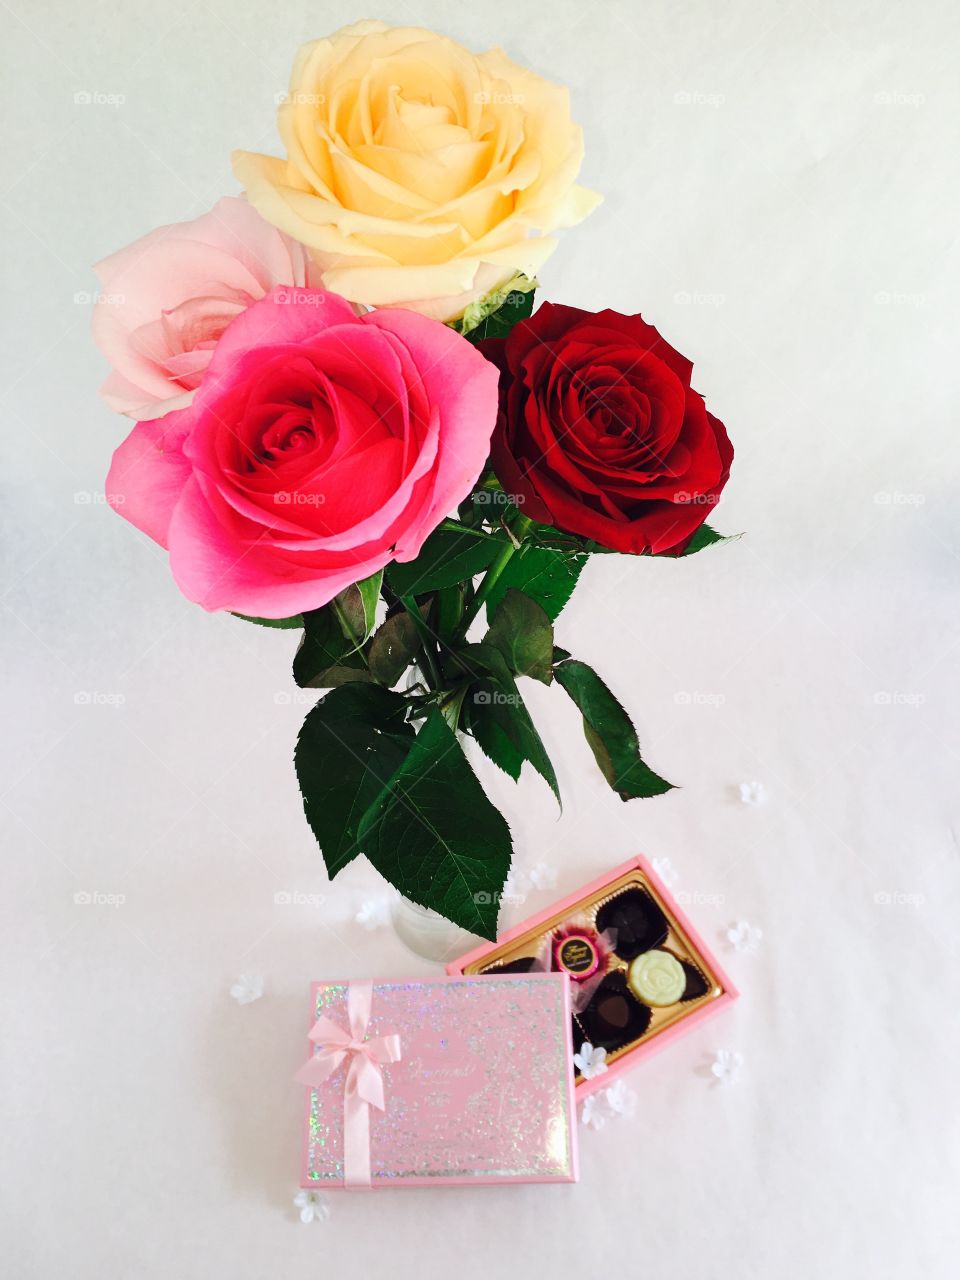 Let's get a little romantic- Roses and chocolate. 